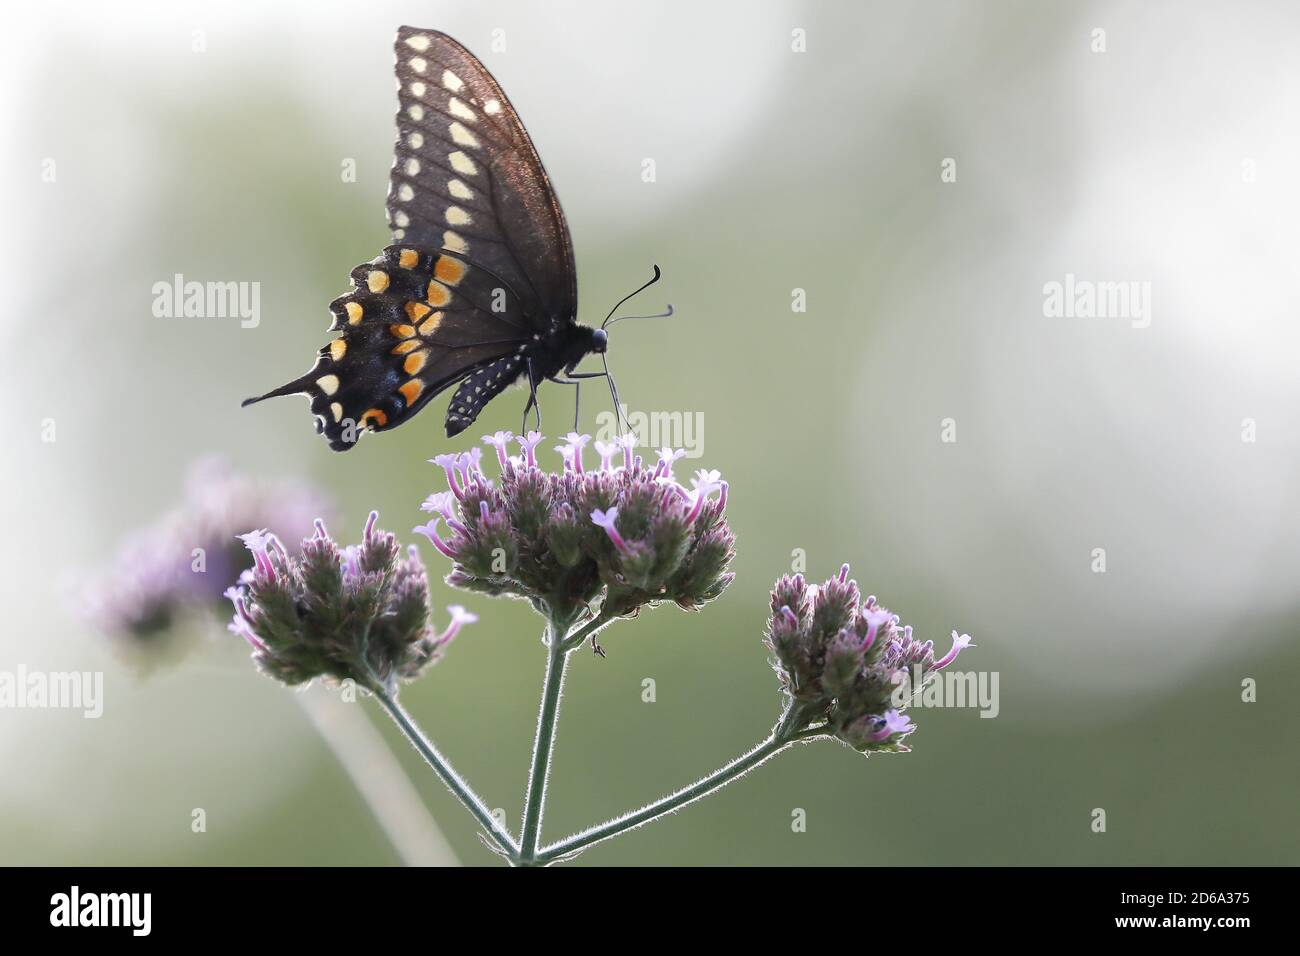 Eastern black swallowtail butterfly (Papilio polyxenes asterius) sucking nectar on a purple flower of New York, North America Stock Photo